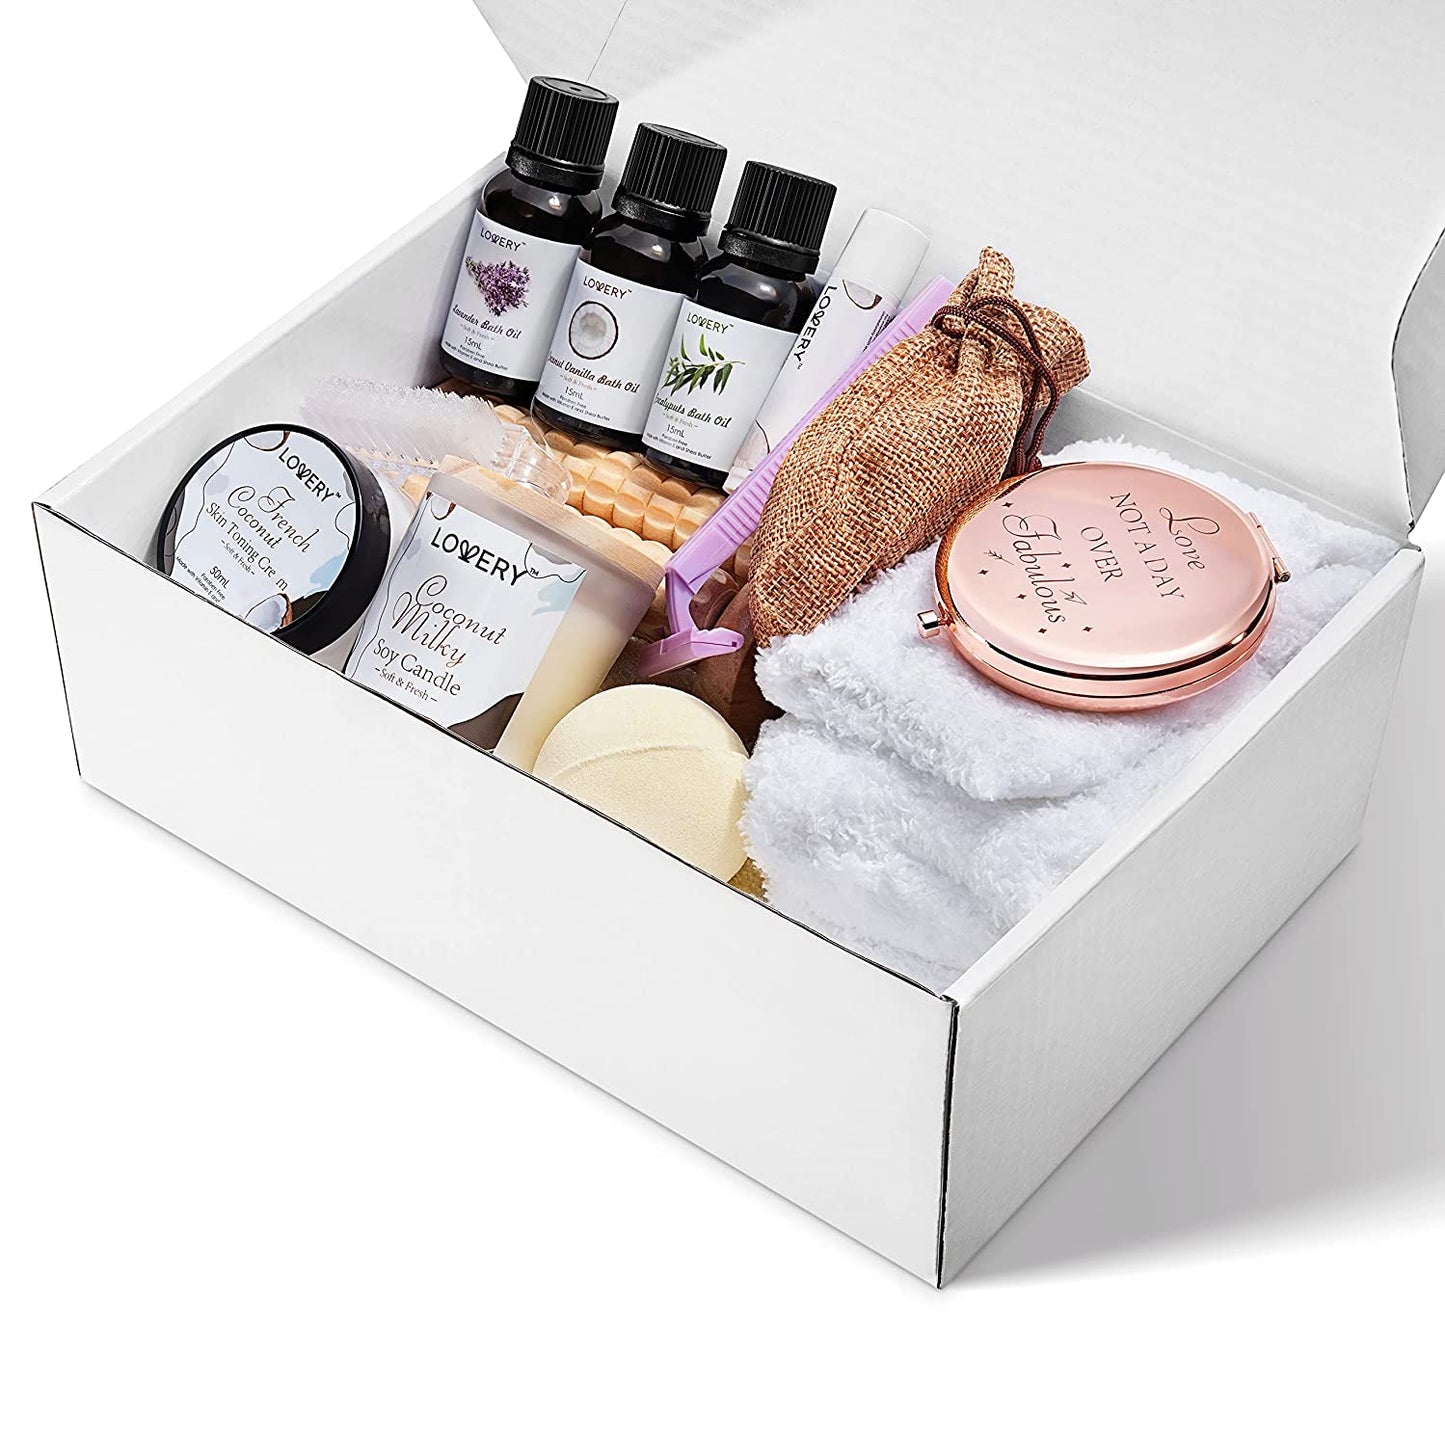 French Coconut Handmade Gift Box - 20Pc Self Care Package